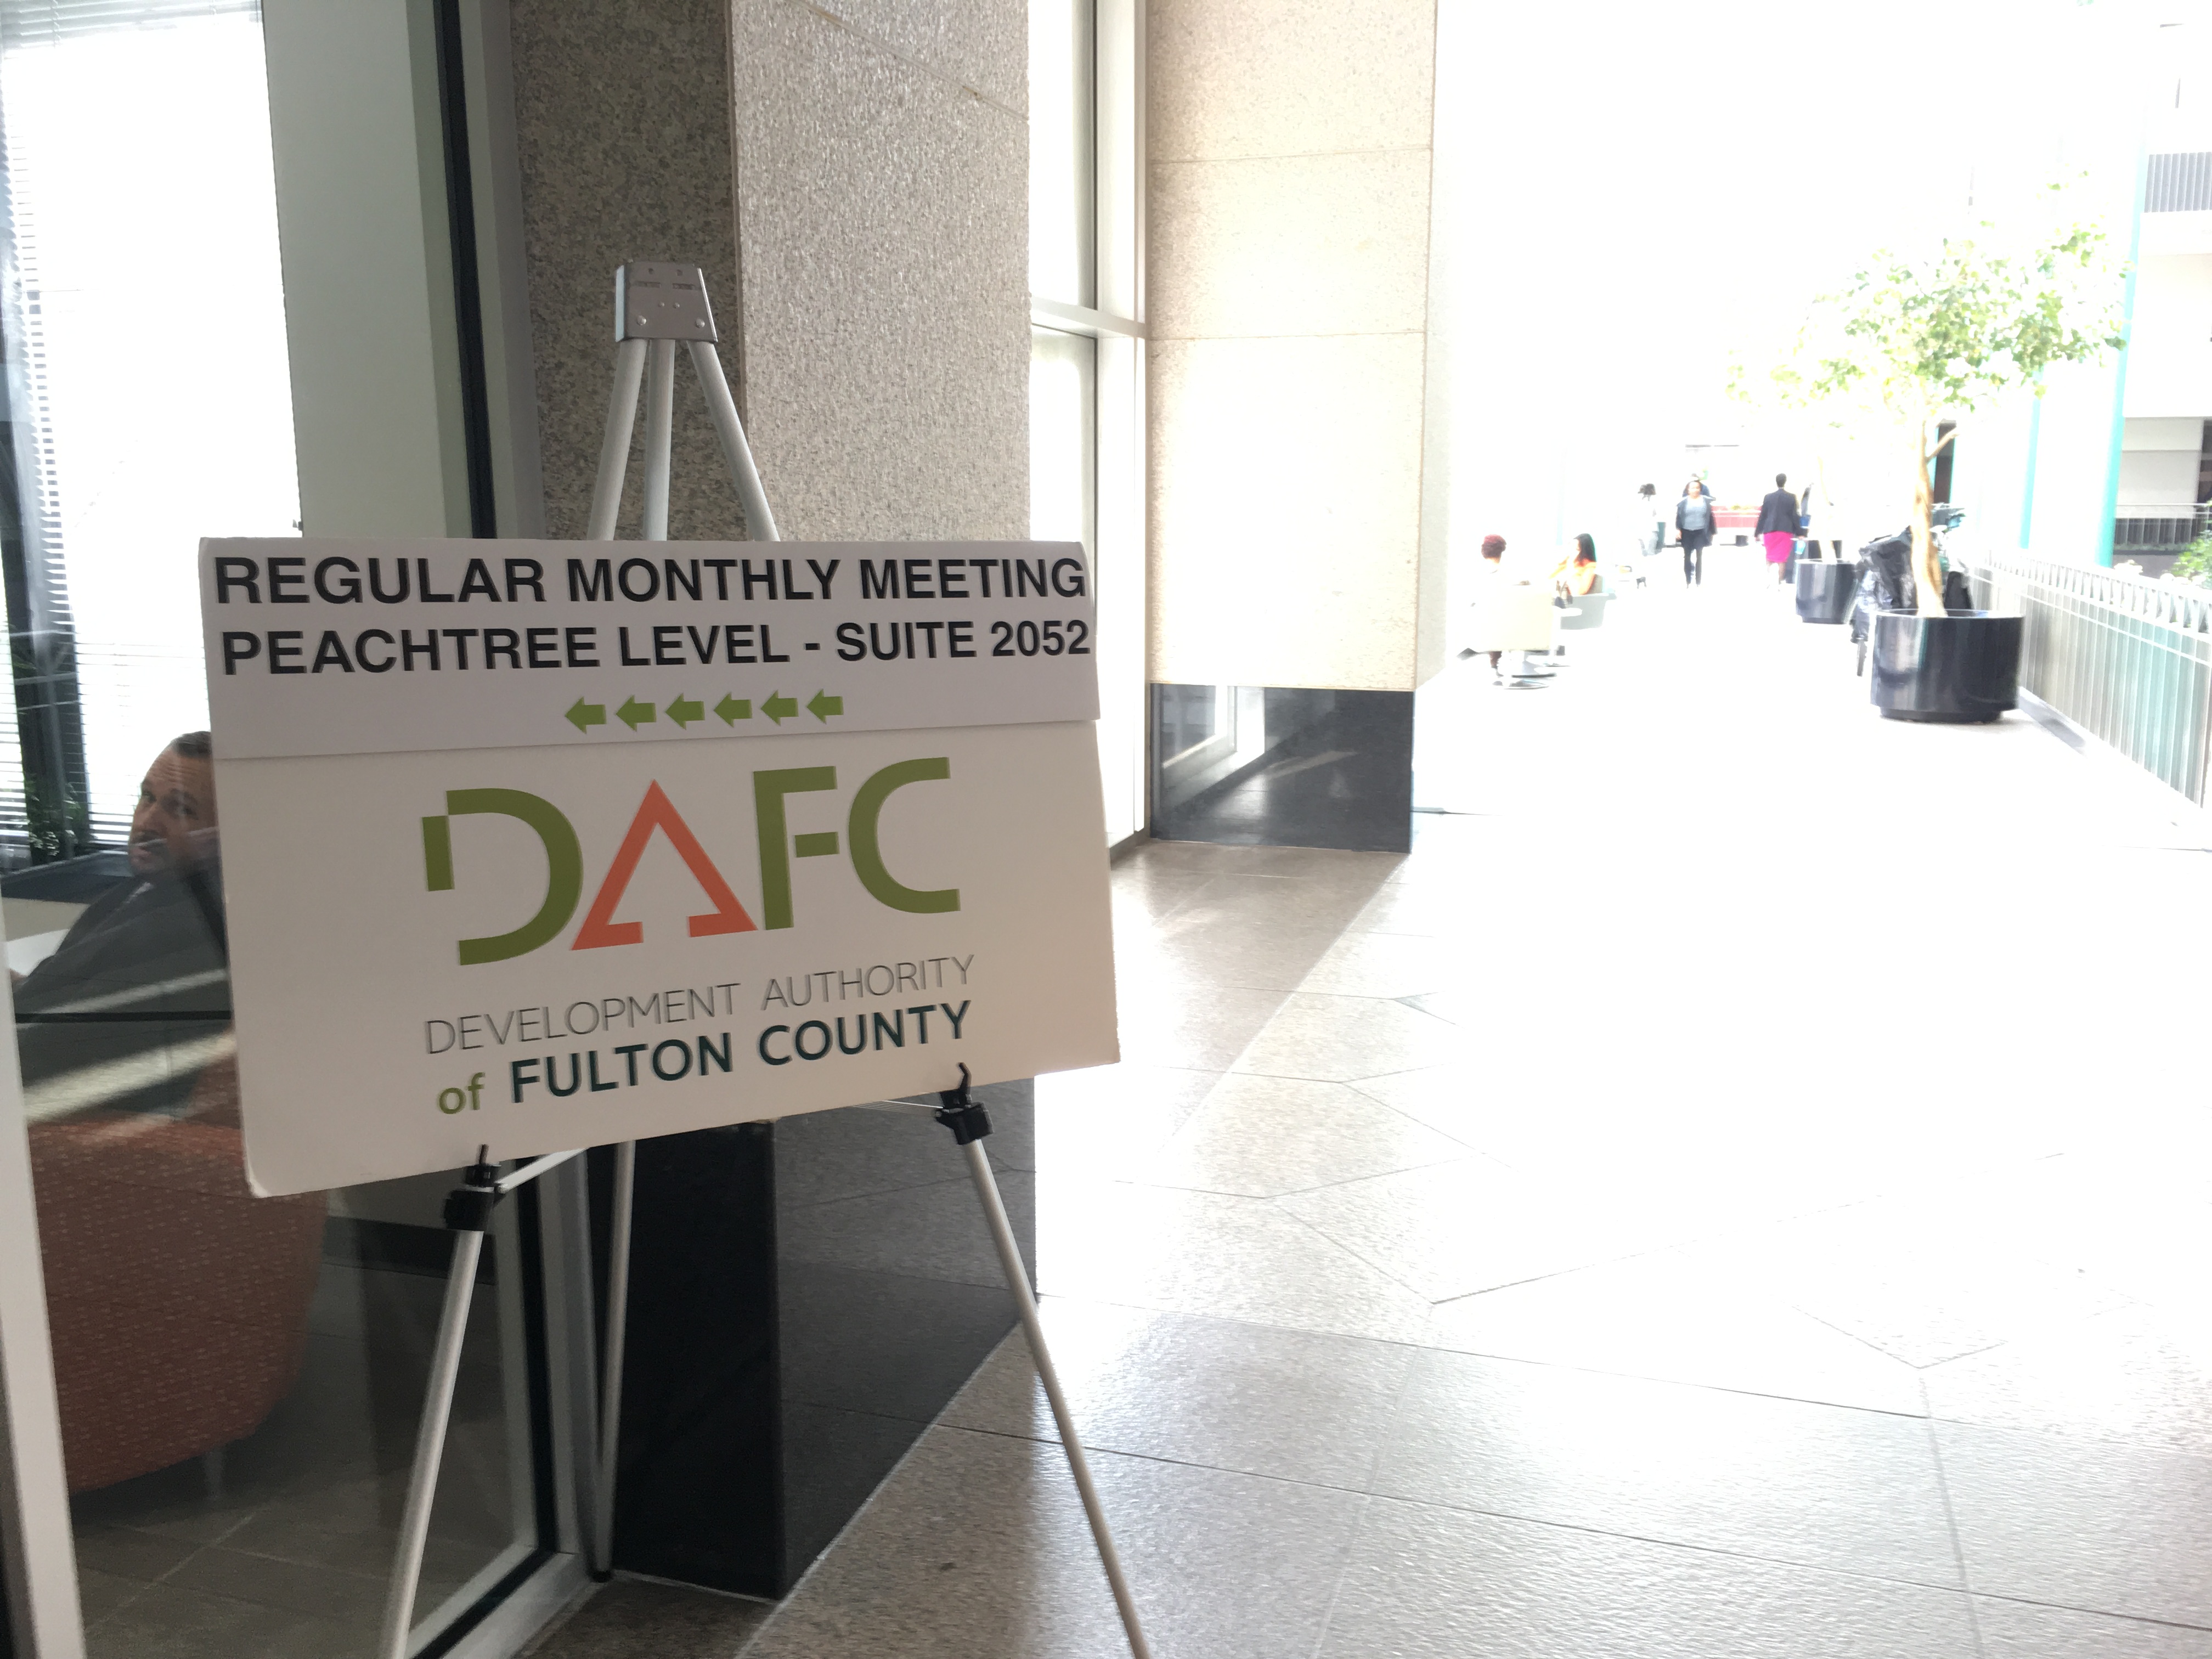 The Development Authority of Fulton County incentivizes deals all over the county, including in Atlanta. Credit: Maggie Lee